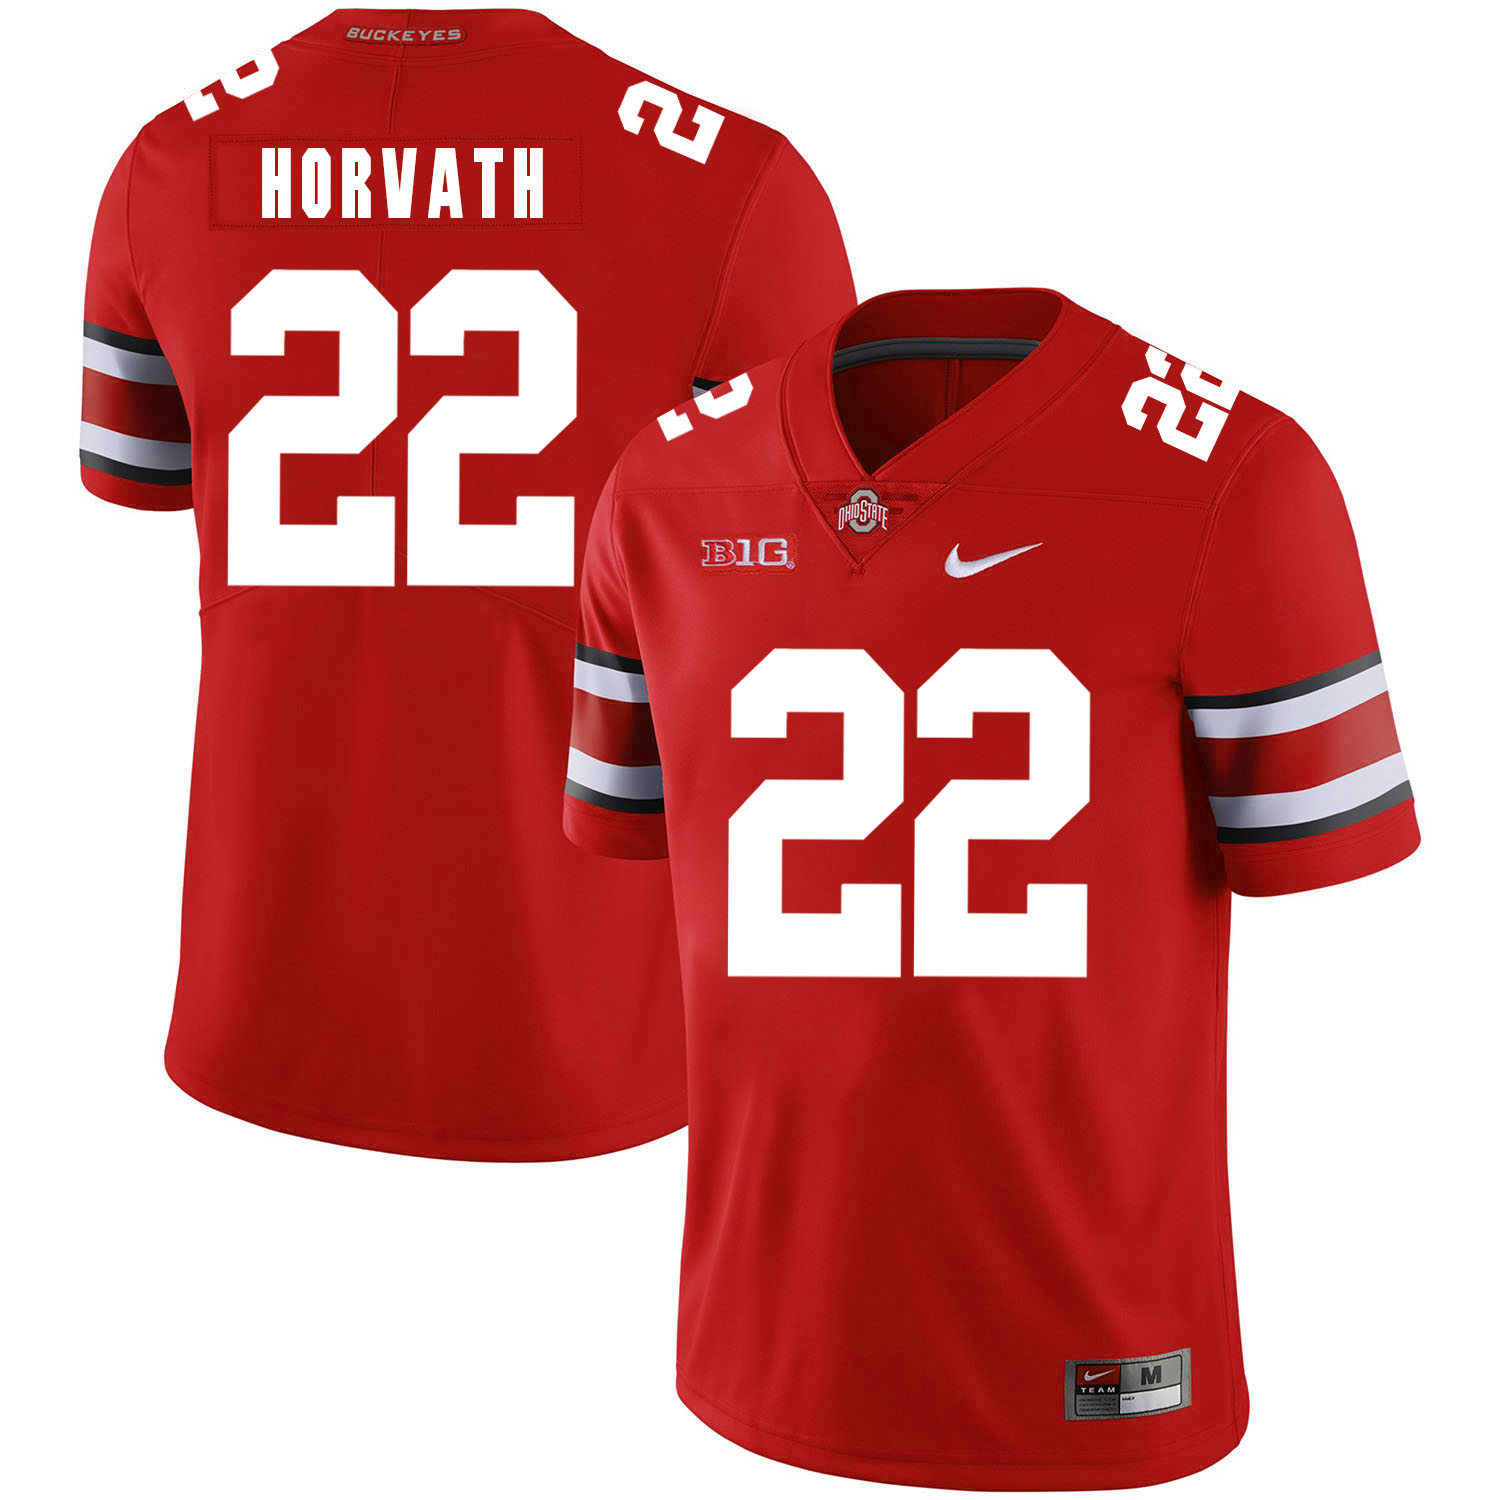 Ohio State Buckeyes 22 Les Horvath Red Nike College Football Jersey